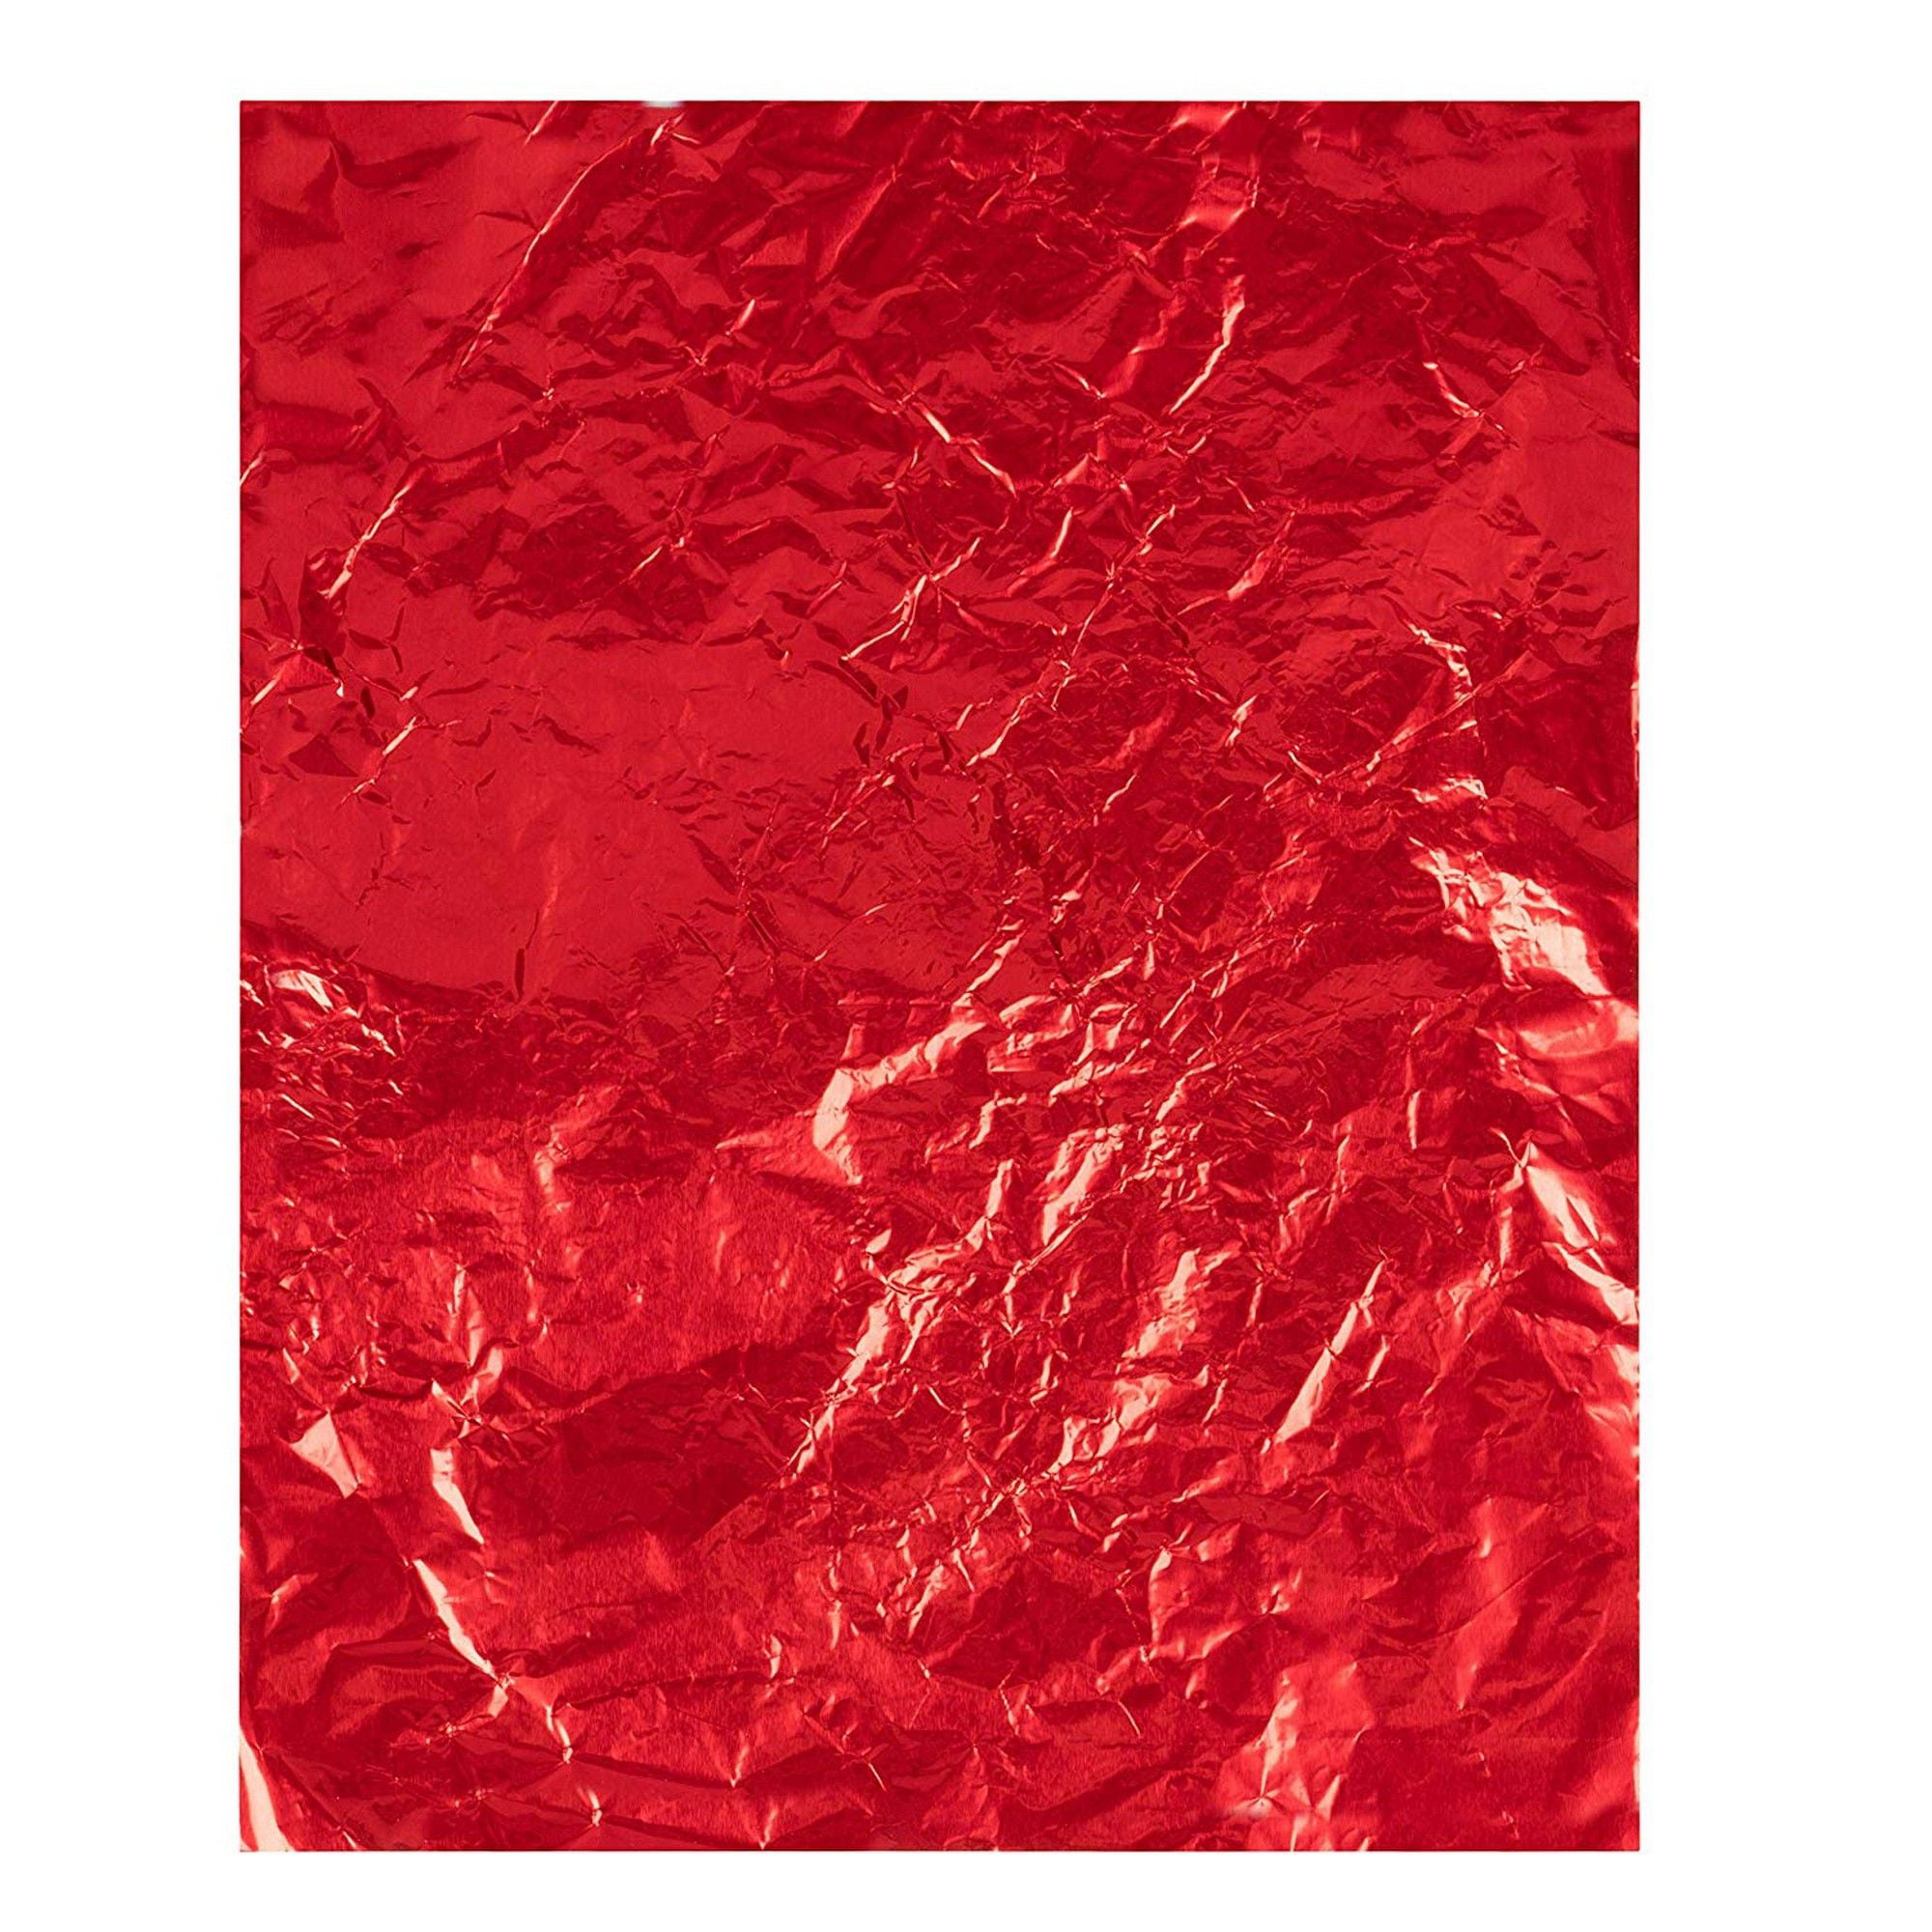 Foil Candy Wrappers 100 Pack Red Aluminum Foil Wrapping Paper 6 X 7 5 Inch Candy Bar Wrappers For Chocolate Caramel Sweets Candy Packaging Wedding Christmas Party Favors Diy Walmart Com Walmart Com